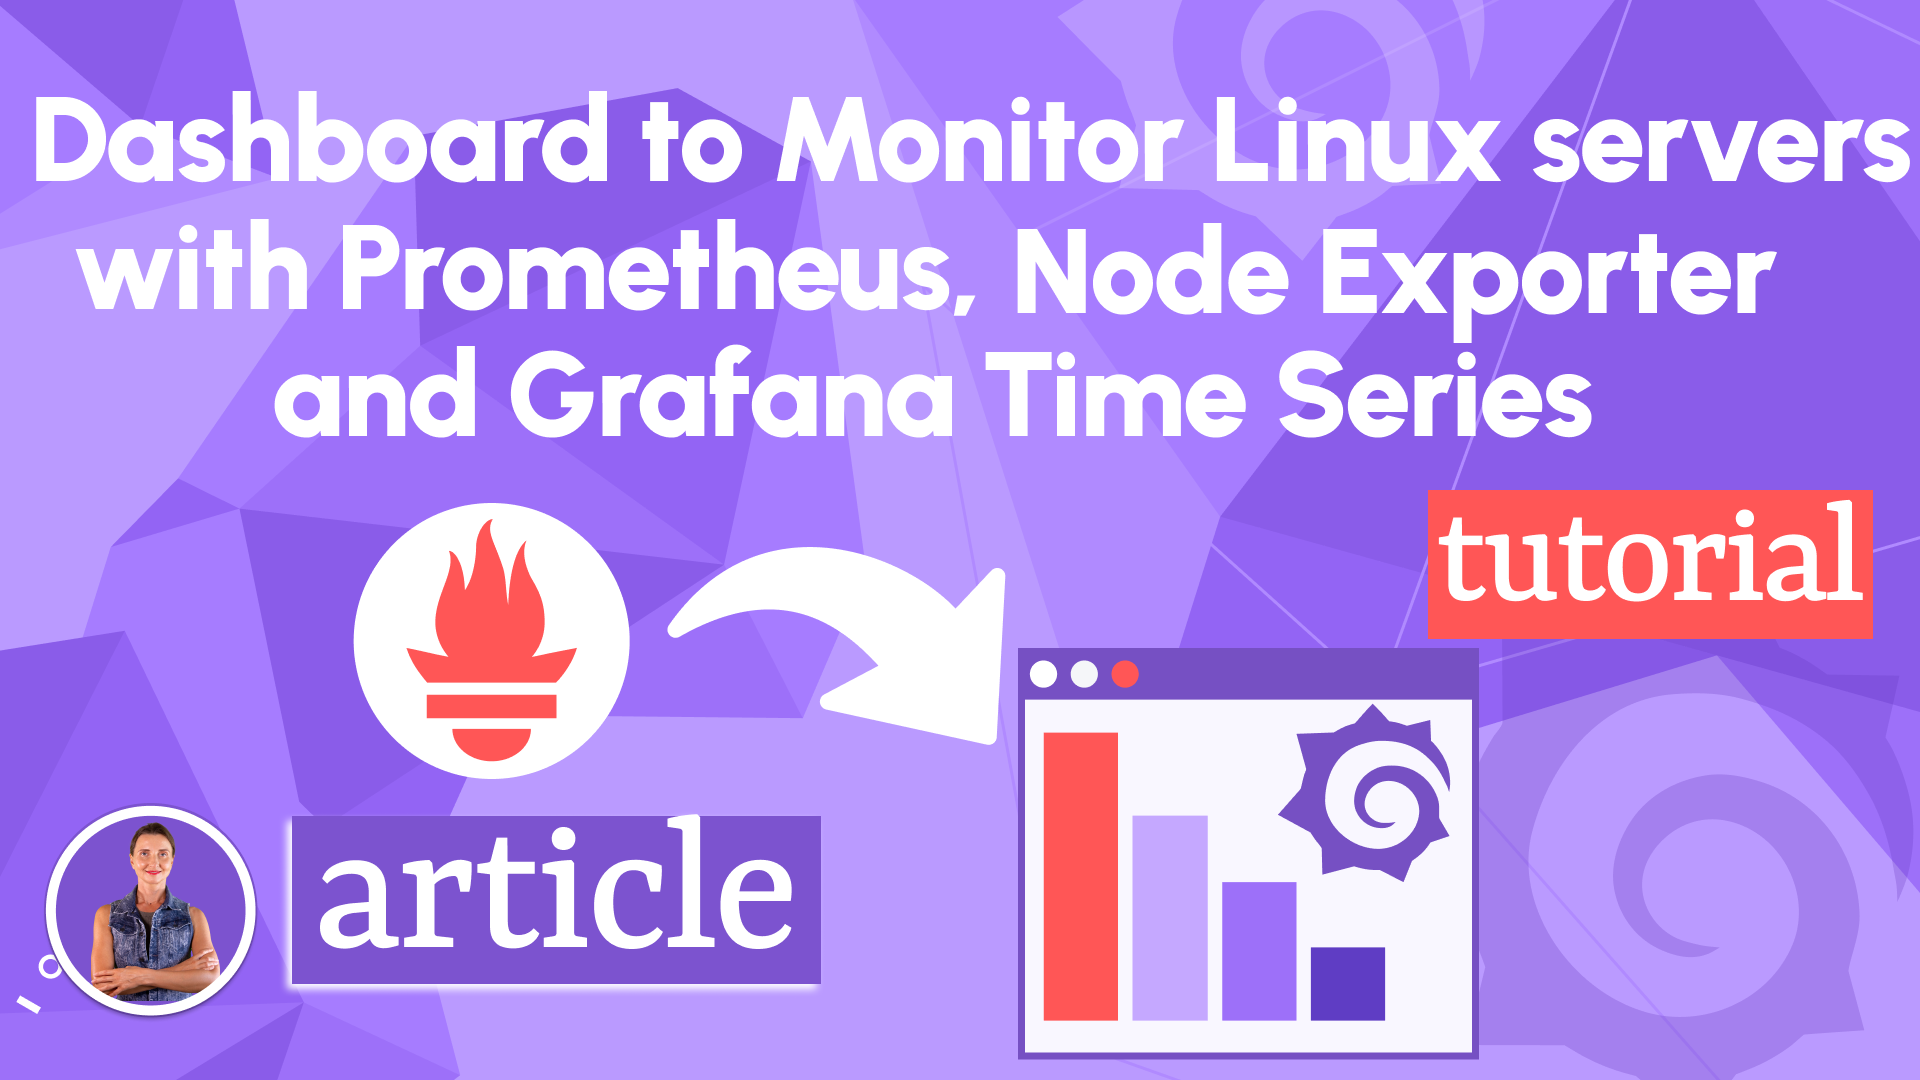 Monitoring Linux servers with Prometheus, Node Exporter and Grafana Time Series